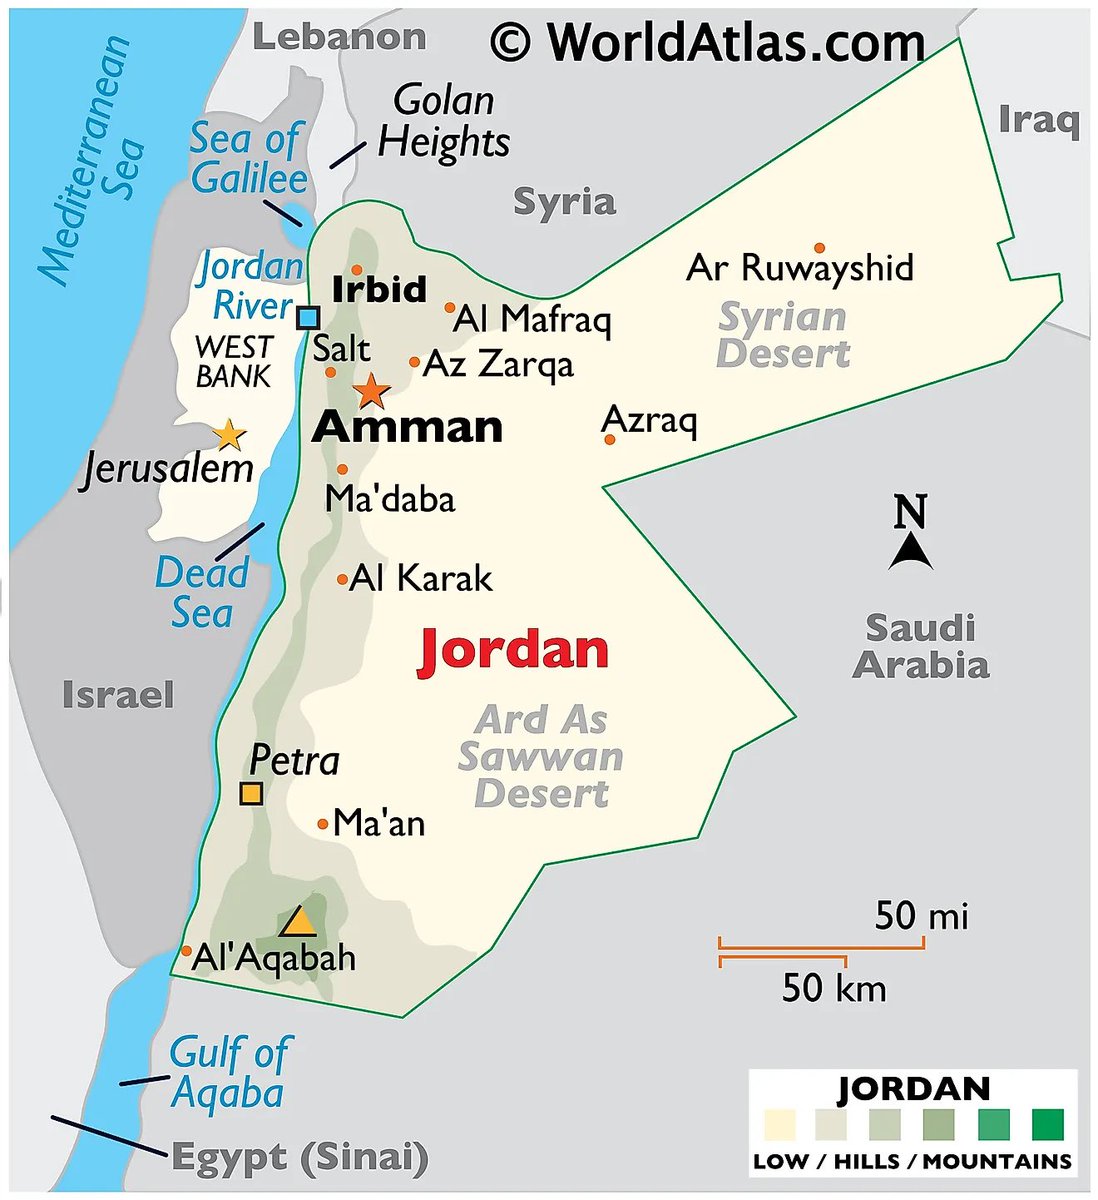 BREAKING: Jordan announces it will shot down any drones entering its airspace